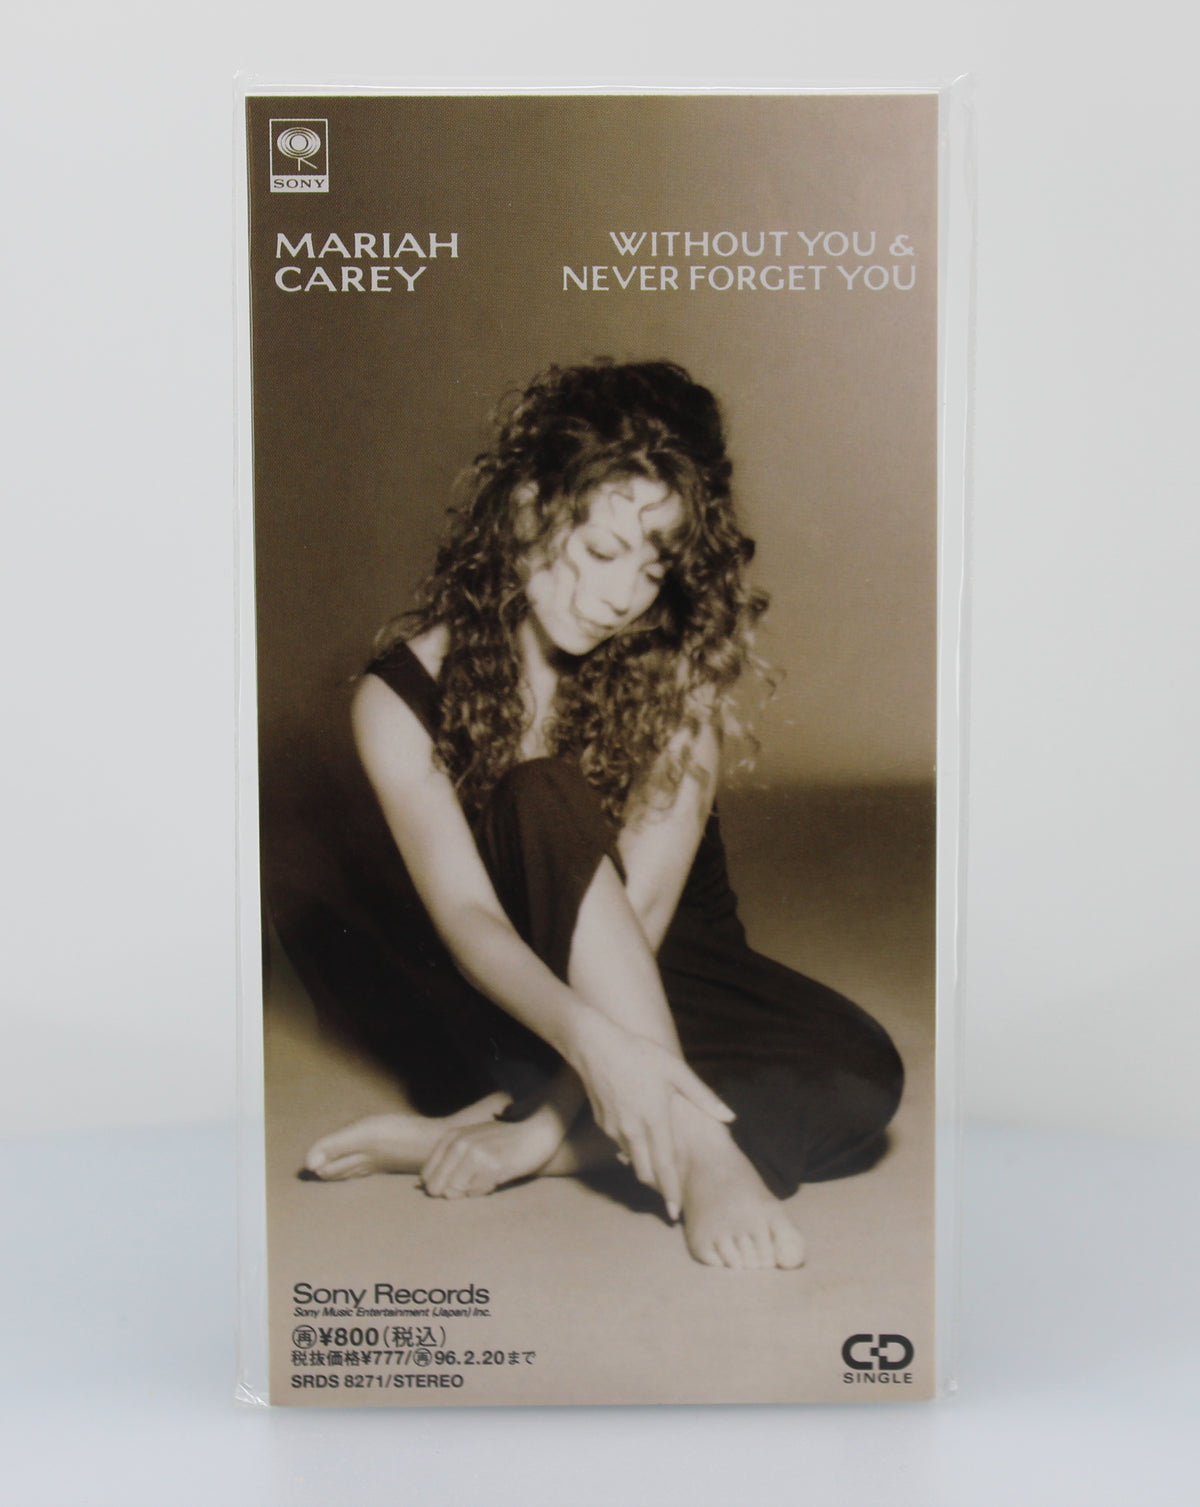 Mariah Carey ‎– Without You &amp; Never Forget You, CD Mni Single, Japan 1994